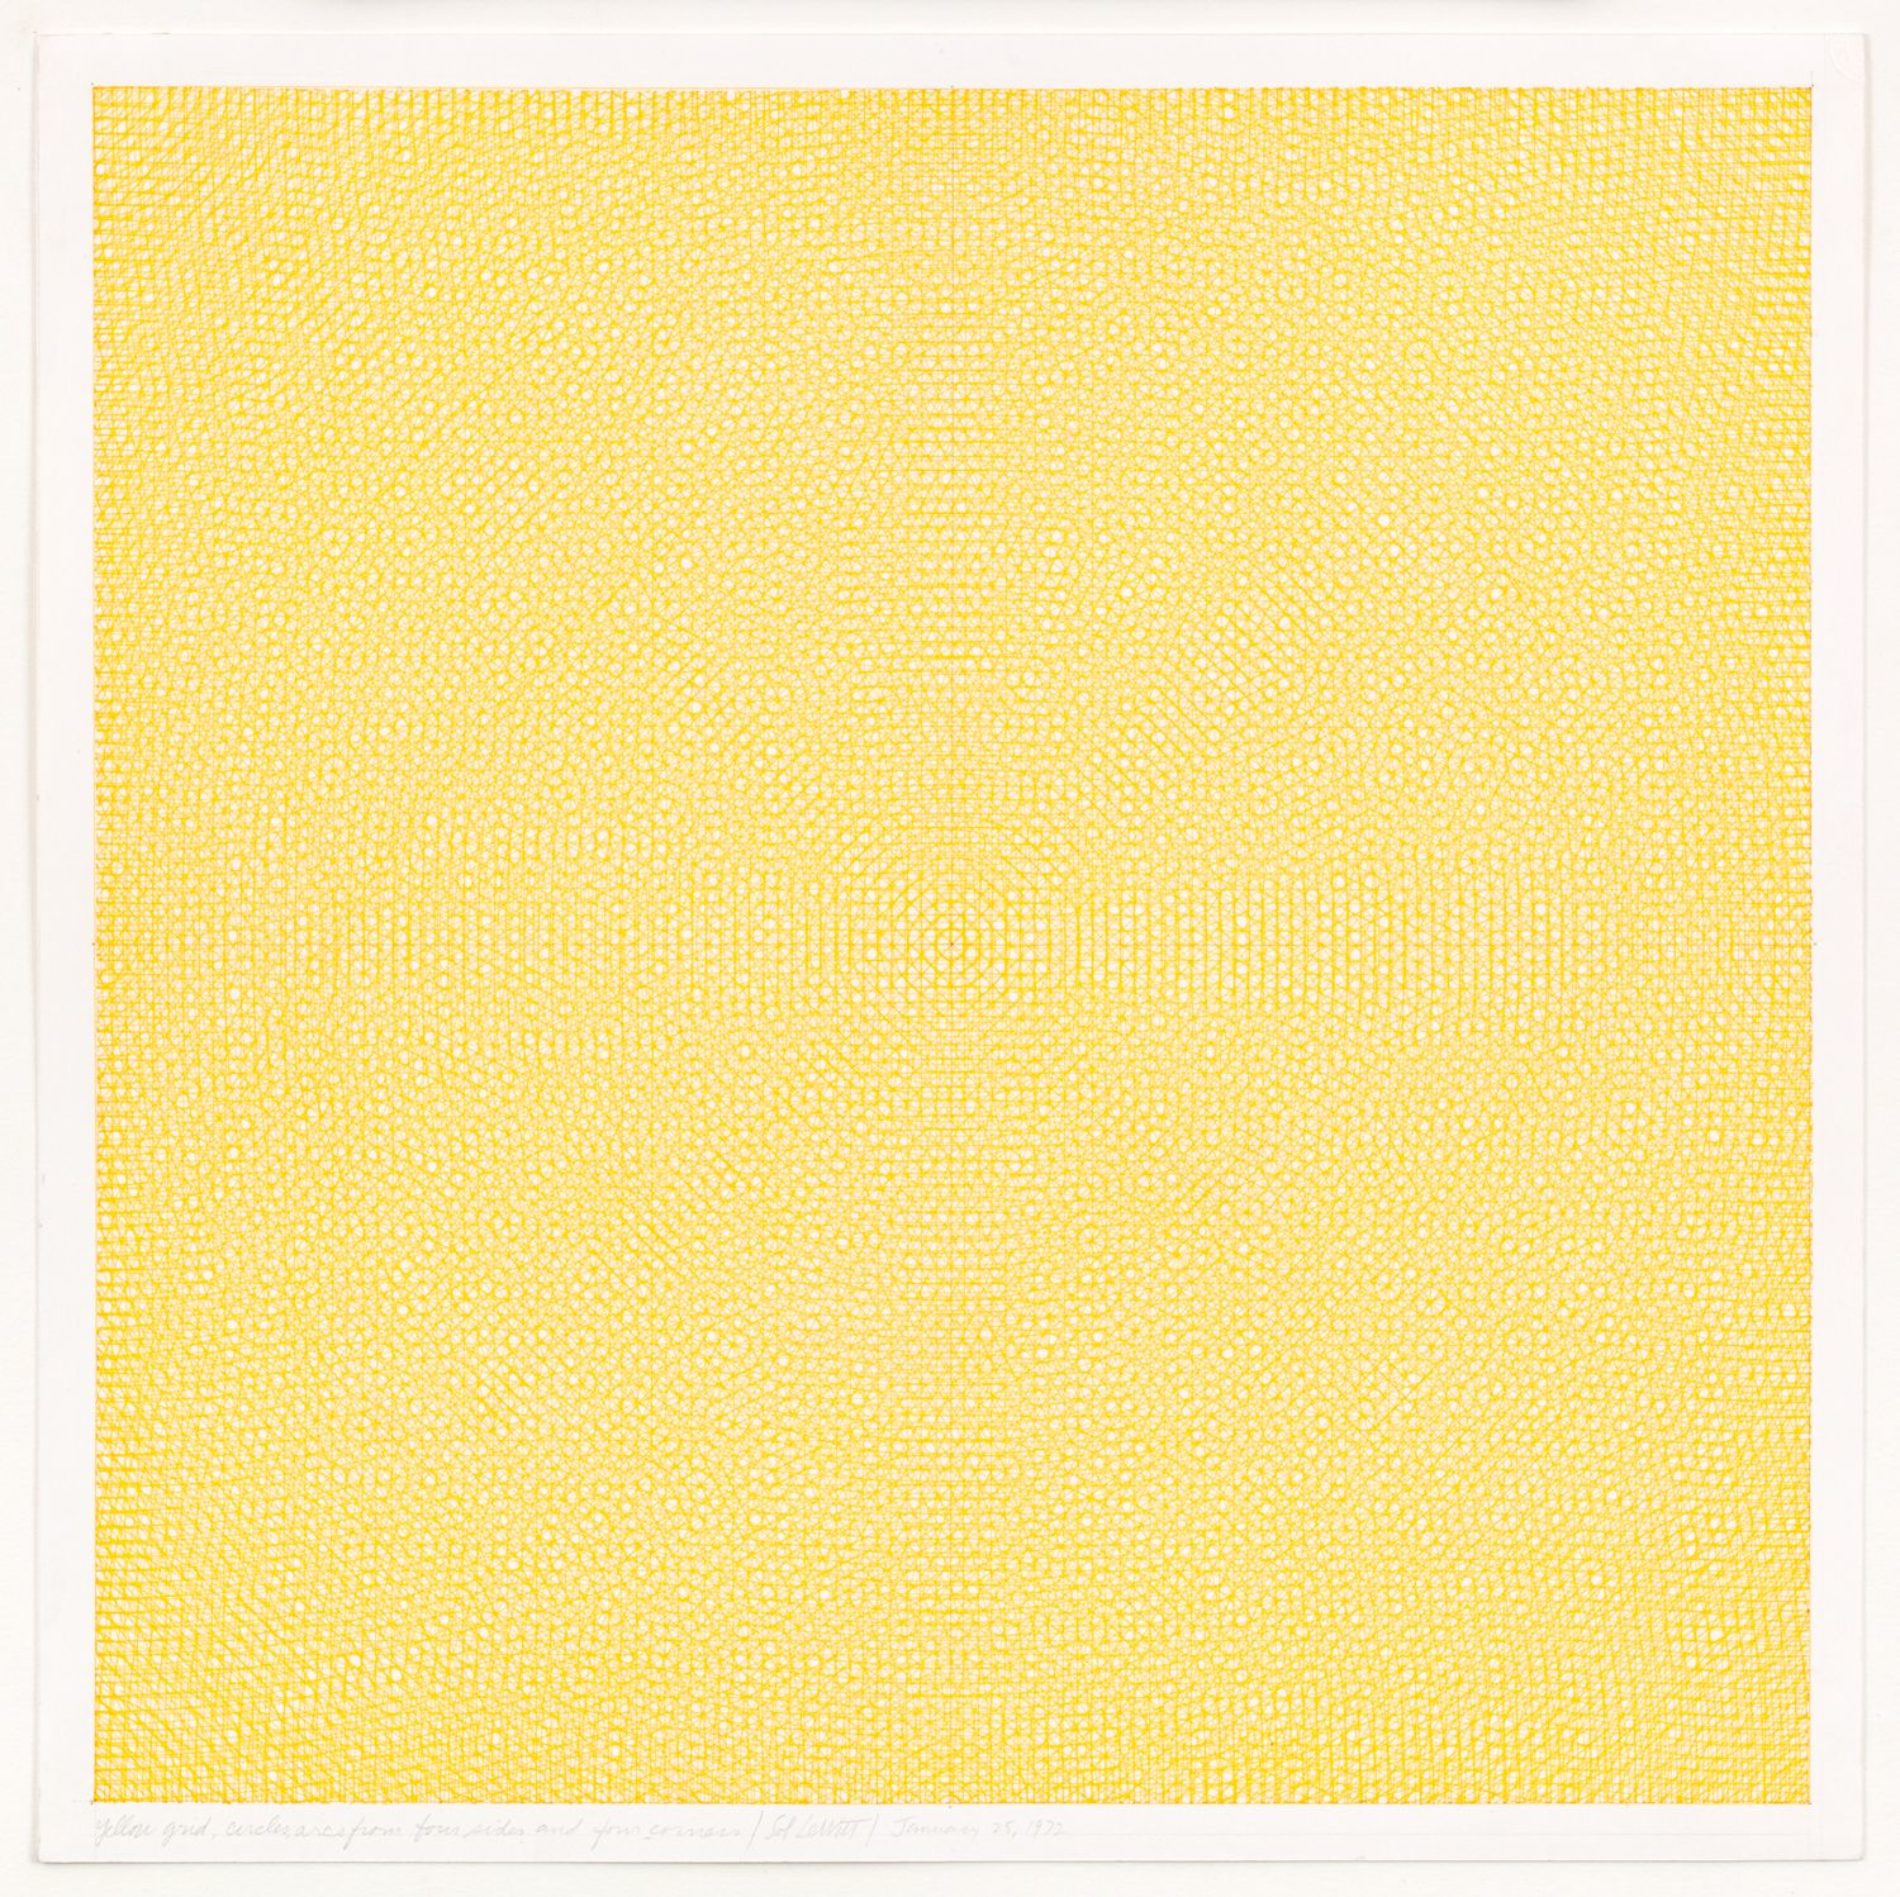 SOL LEWITT 1 + 1 = 1 MILLION, CURATED BY TOM SACHS VITO SCHNABEL GALLERY – ST. MORITZ FEB 15 – MAR 11 2018